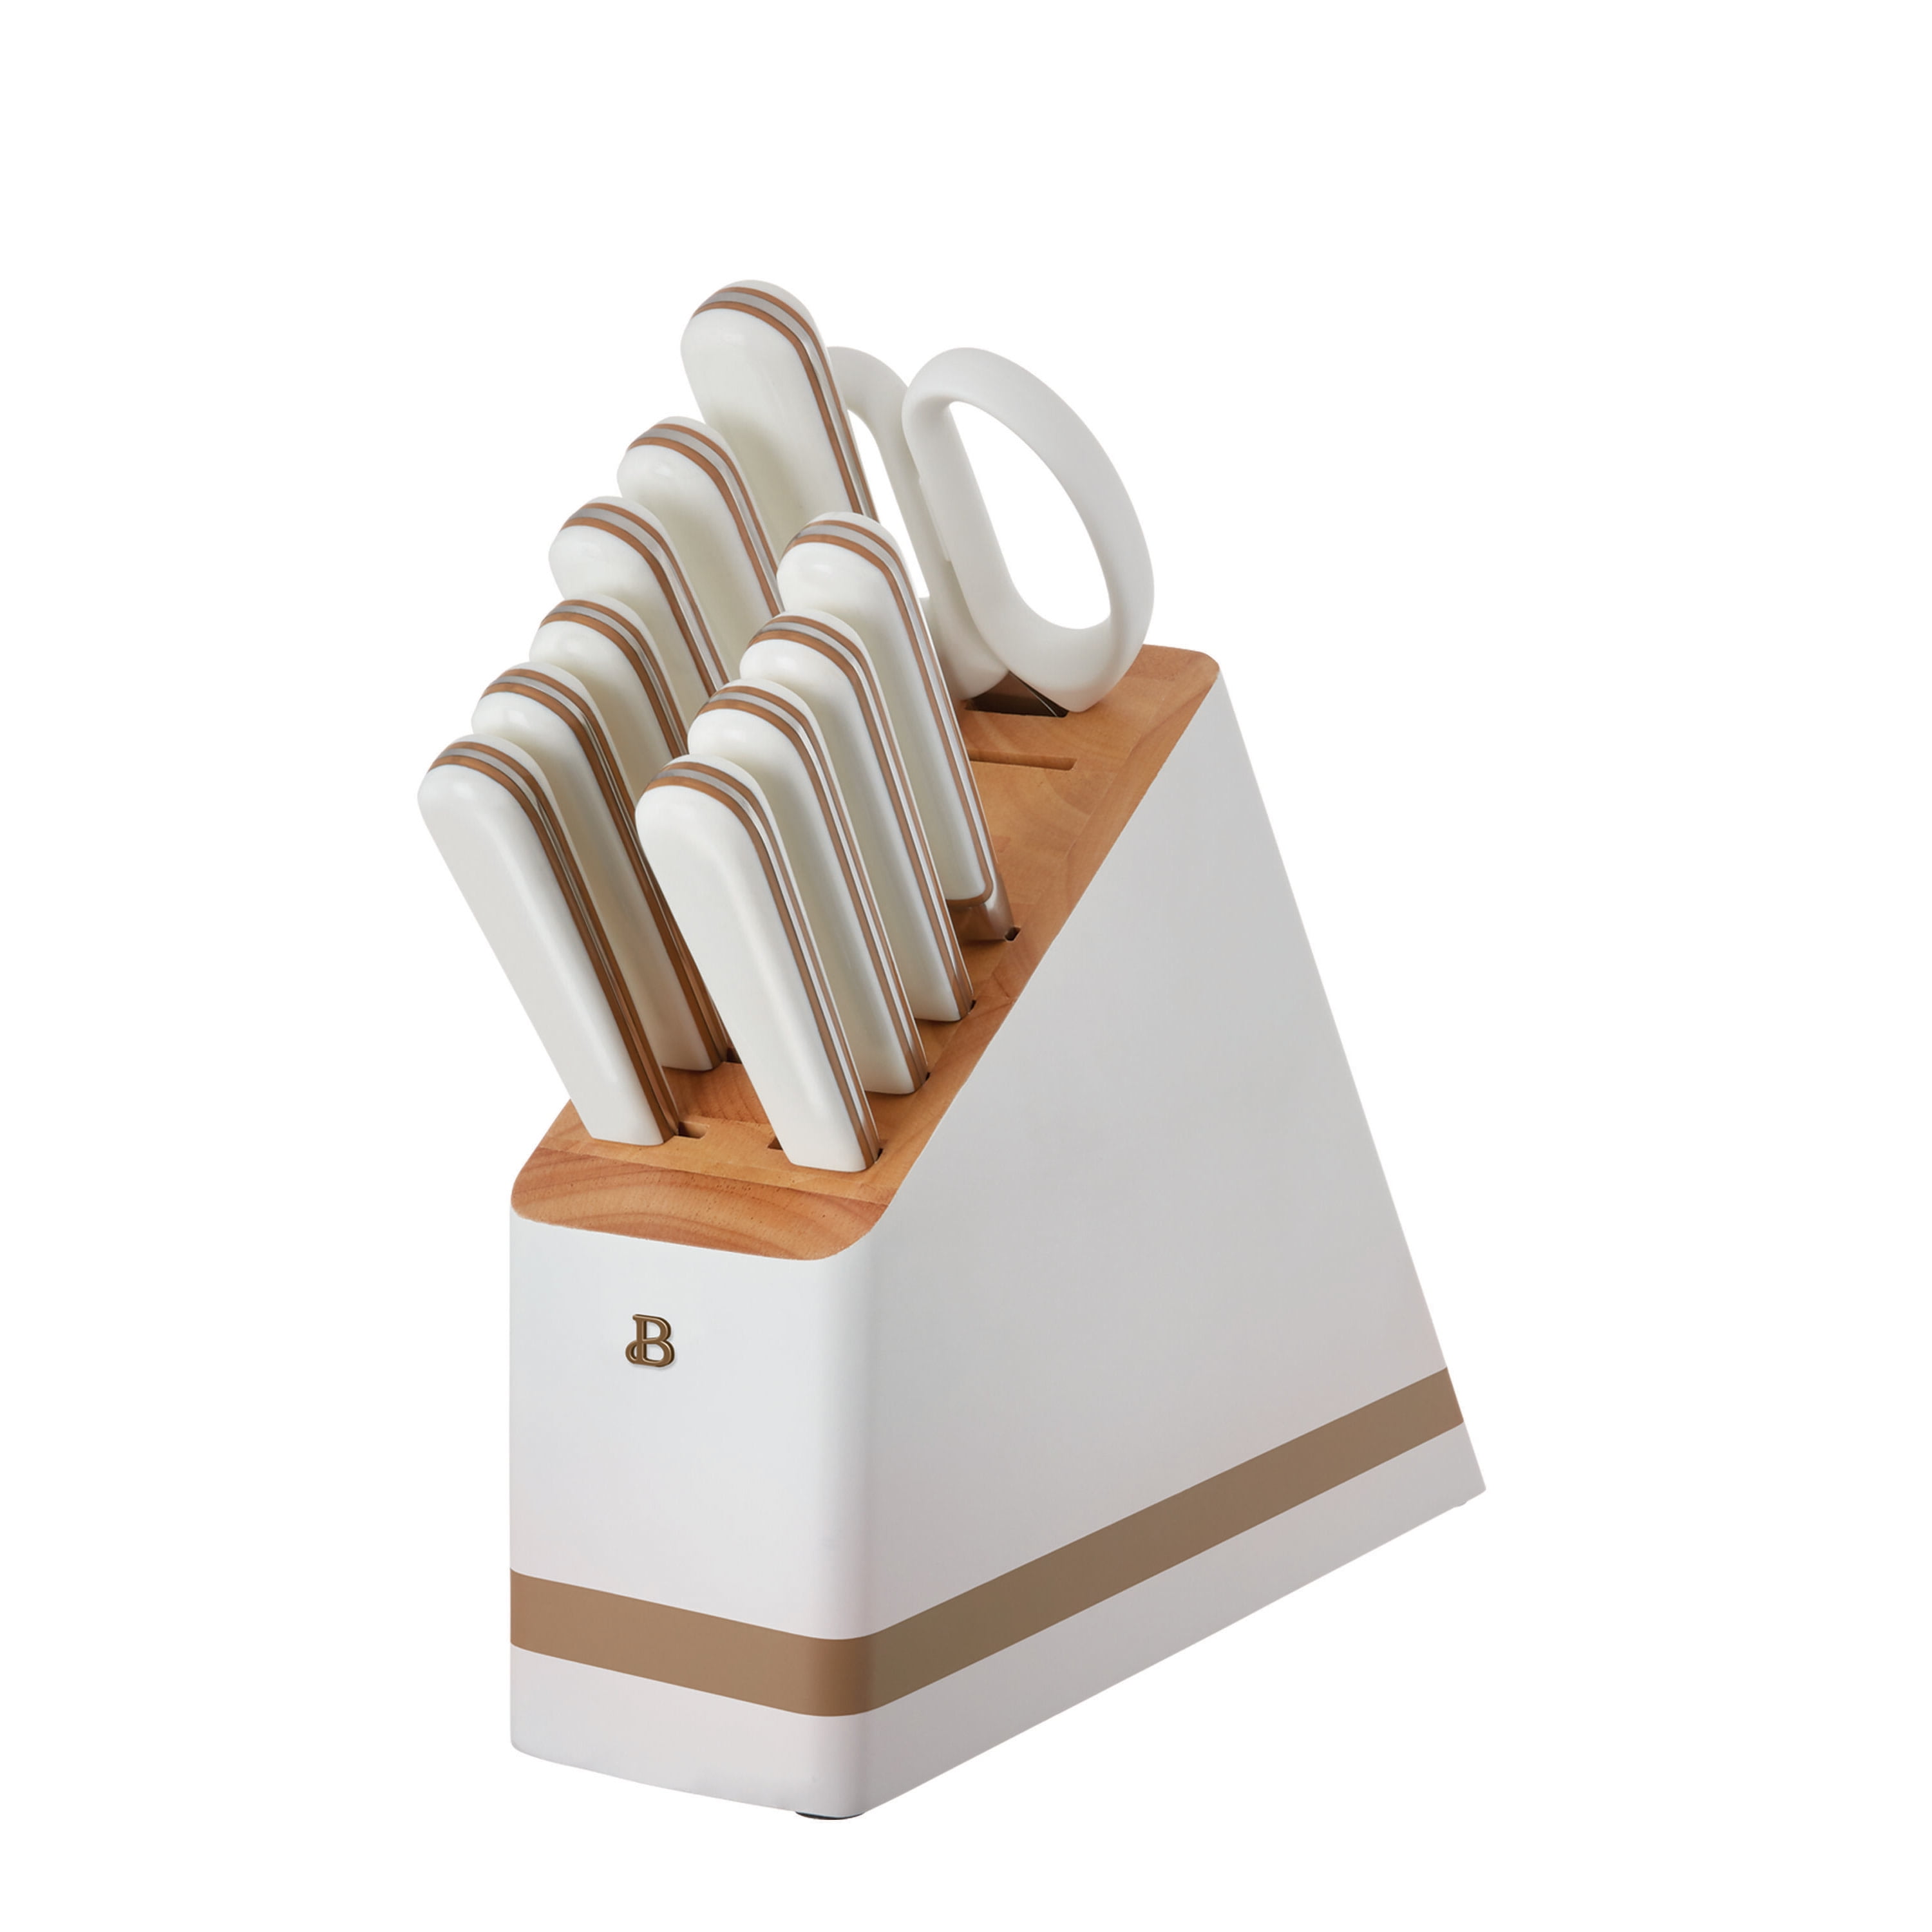 Beautiful 12-piece Forged Kitchen Knife Set in White with Wood Storage Block - Walmart.com